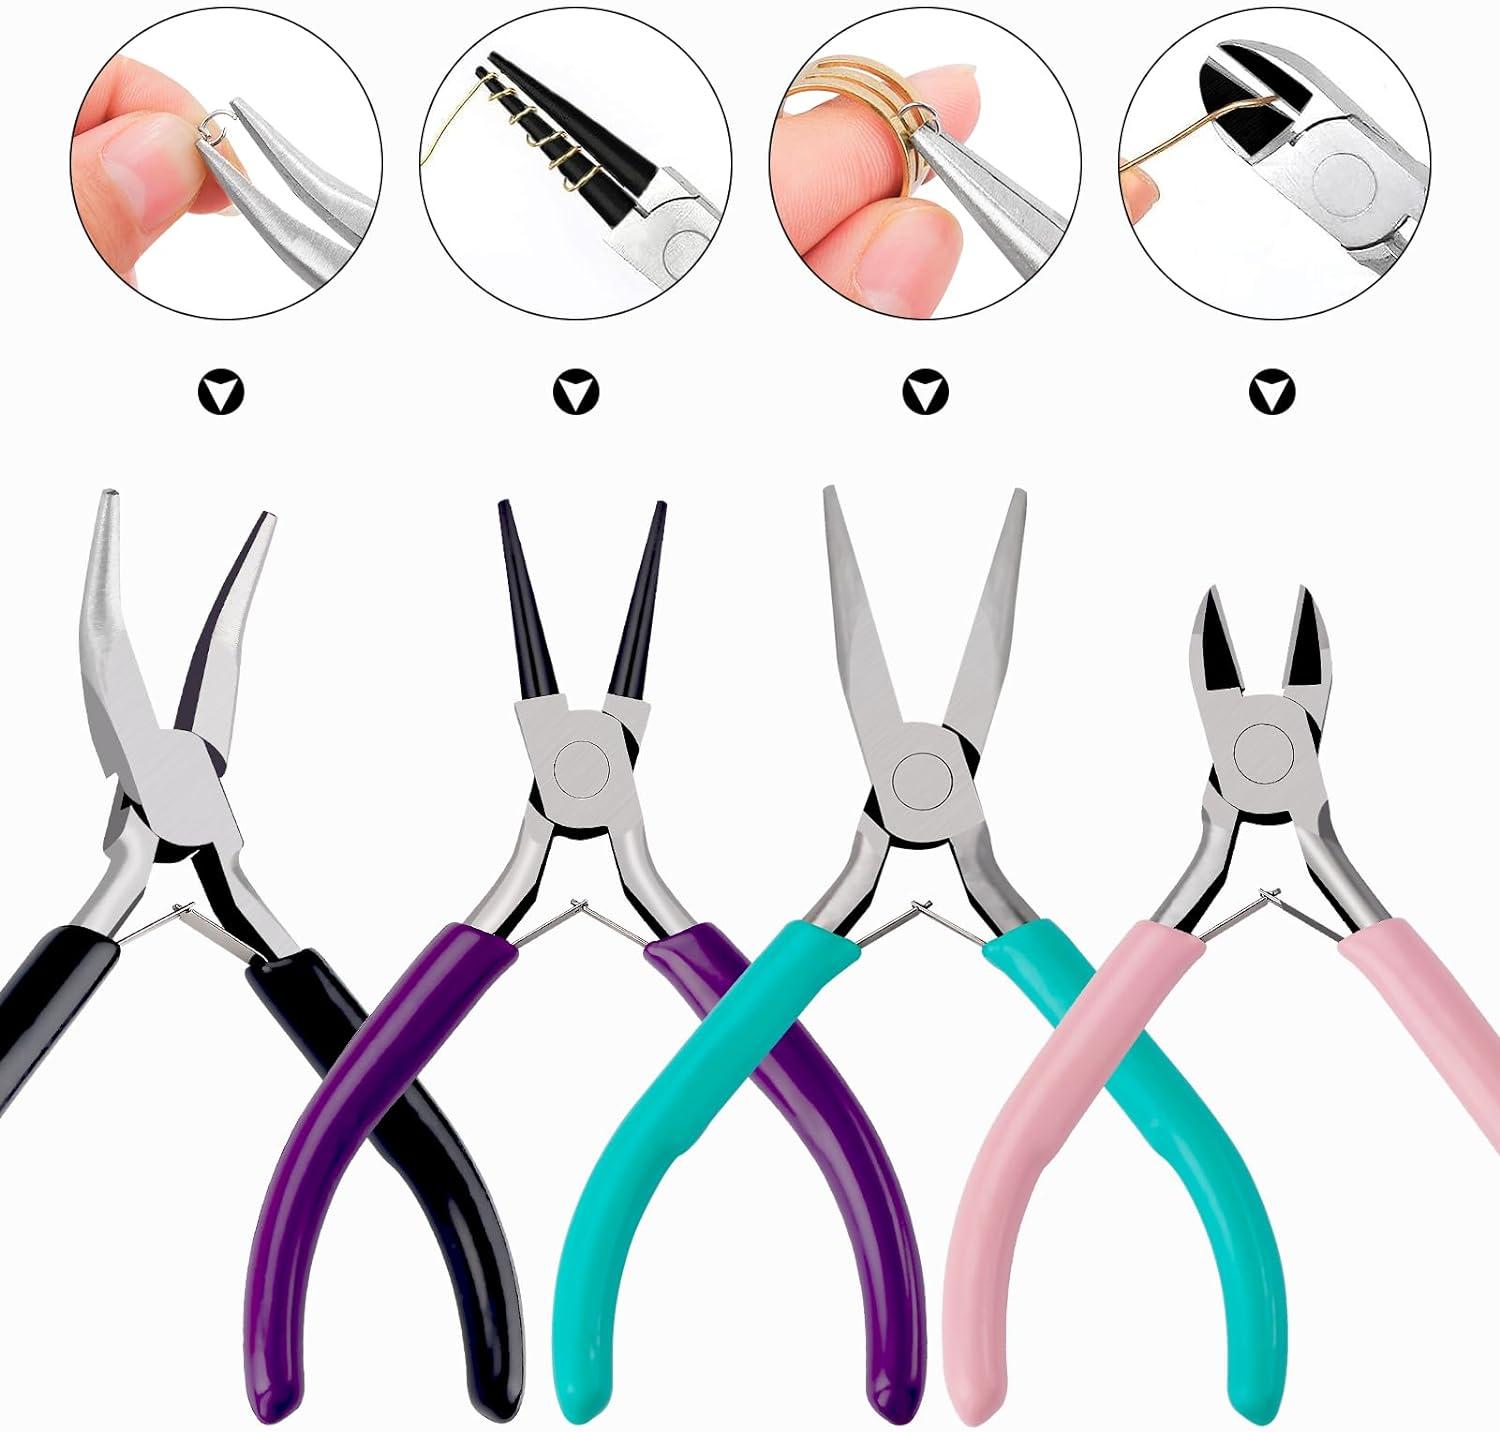 5 Pack Jewelry Pliers Set - Wire Cutter, Round Nose, Needle Nose, Curved  Nose, and Flat Nose Pliers for DIY Jewelry Making